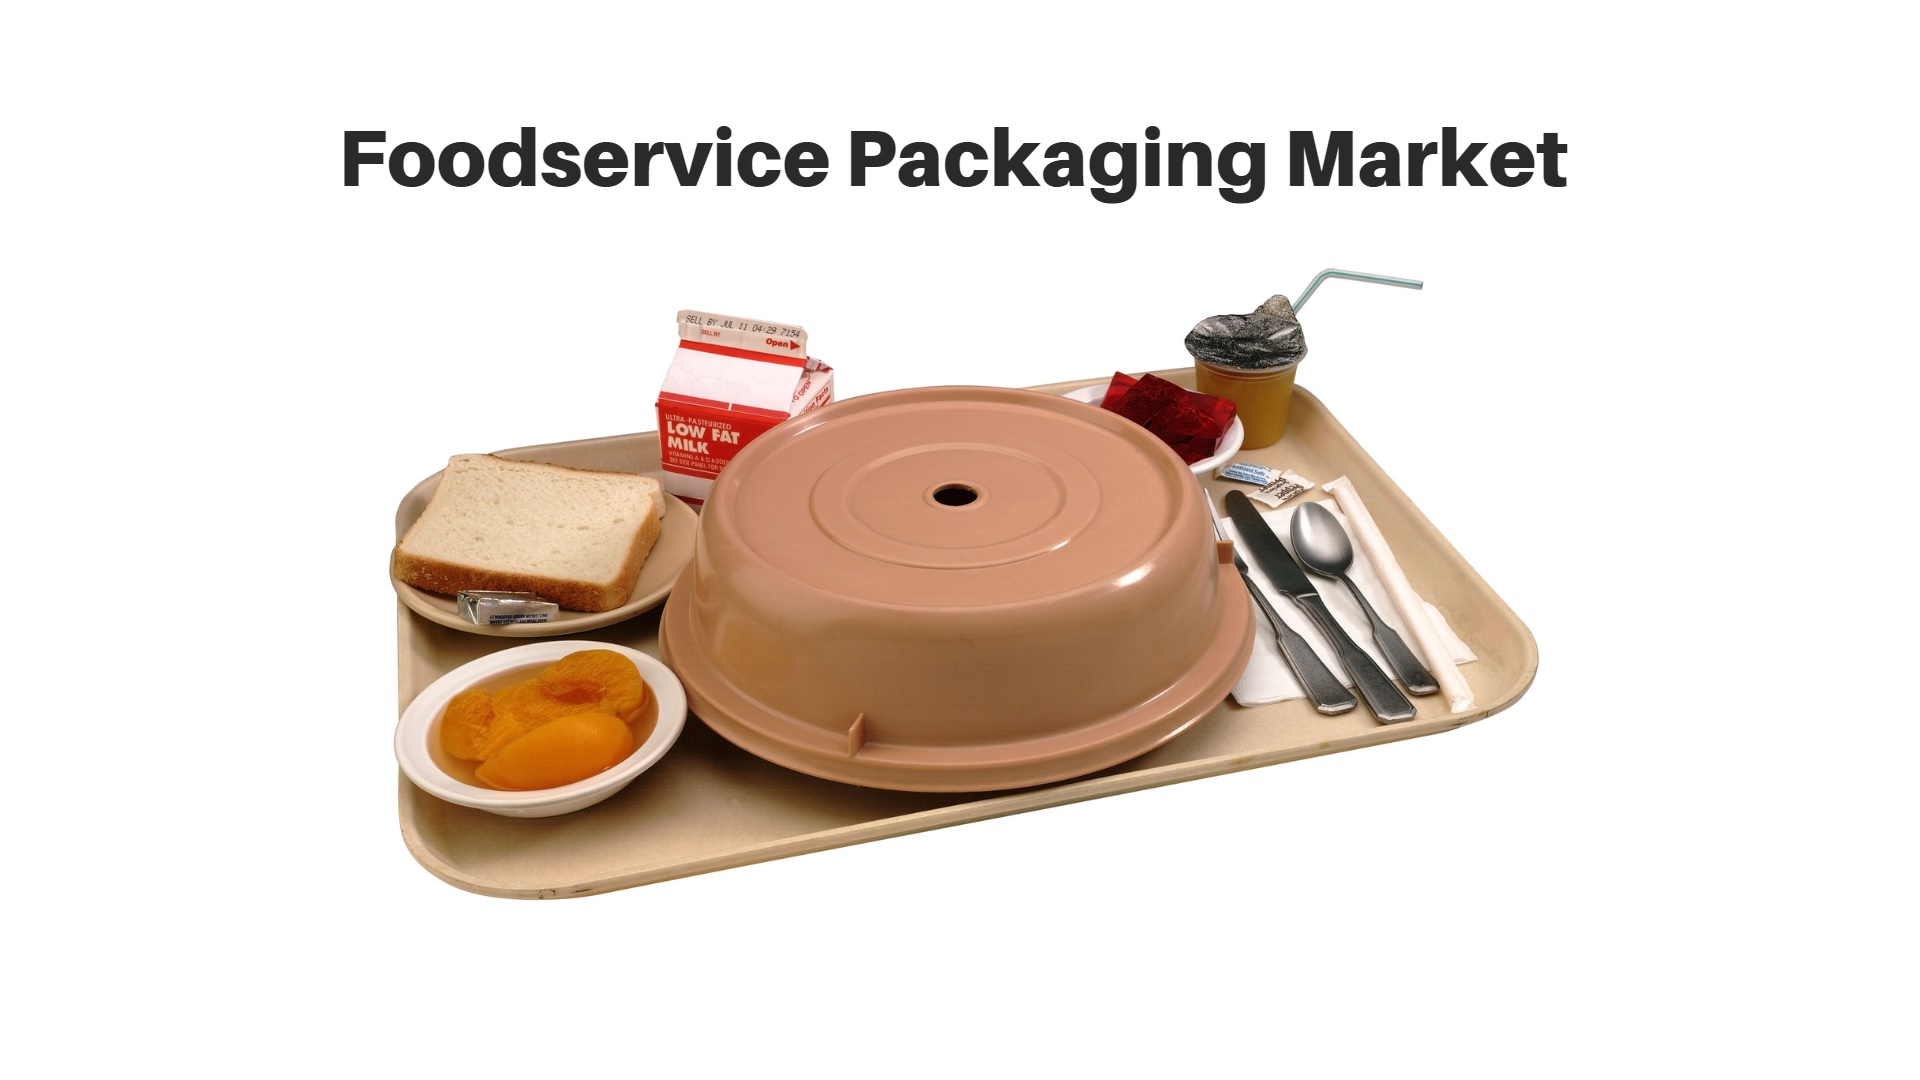 Foodservice Packaging Market is current value of USD 124.8 Bn in 2023, growth rate (CAGR) of 4.54%